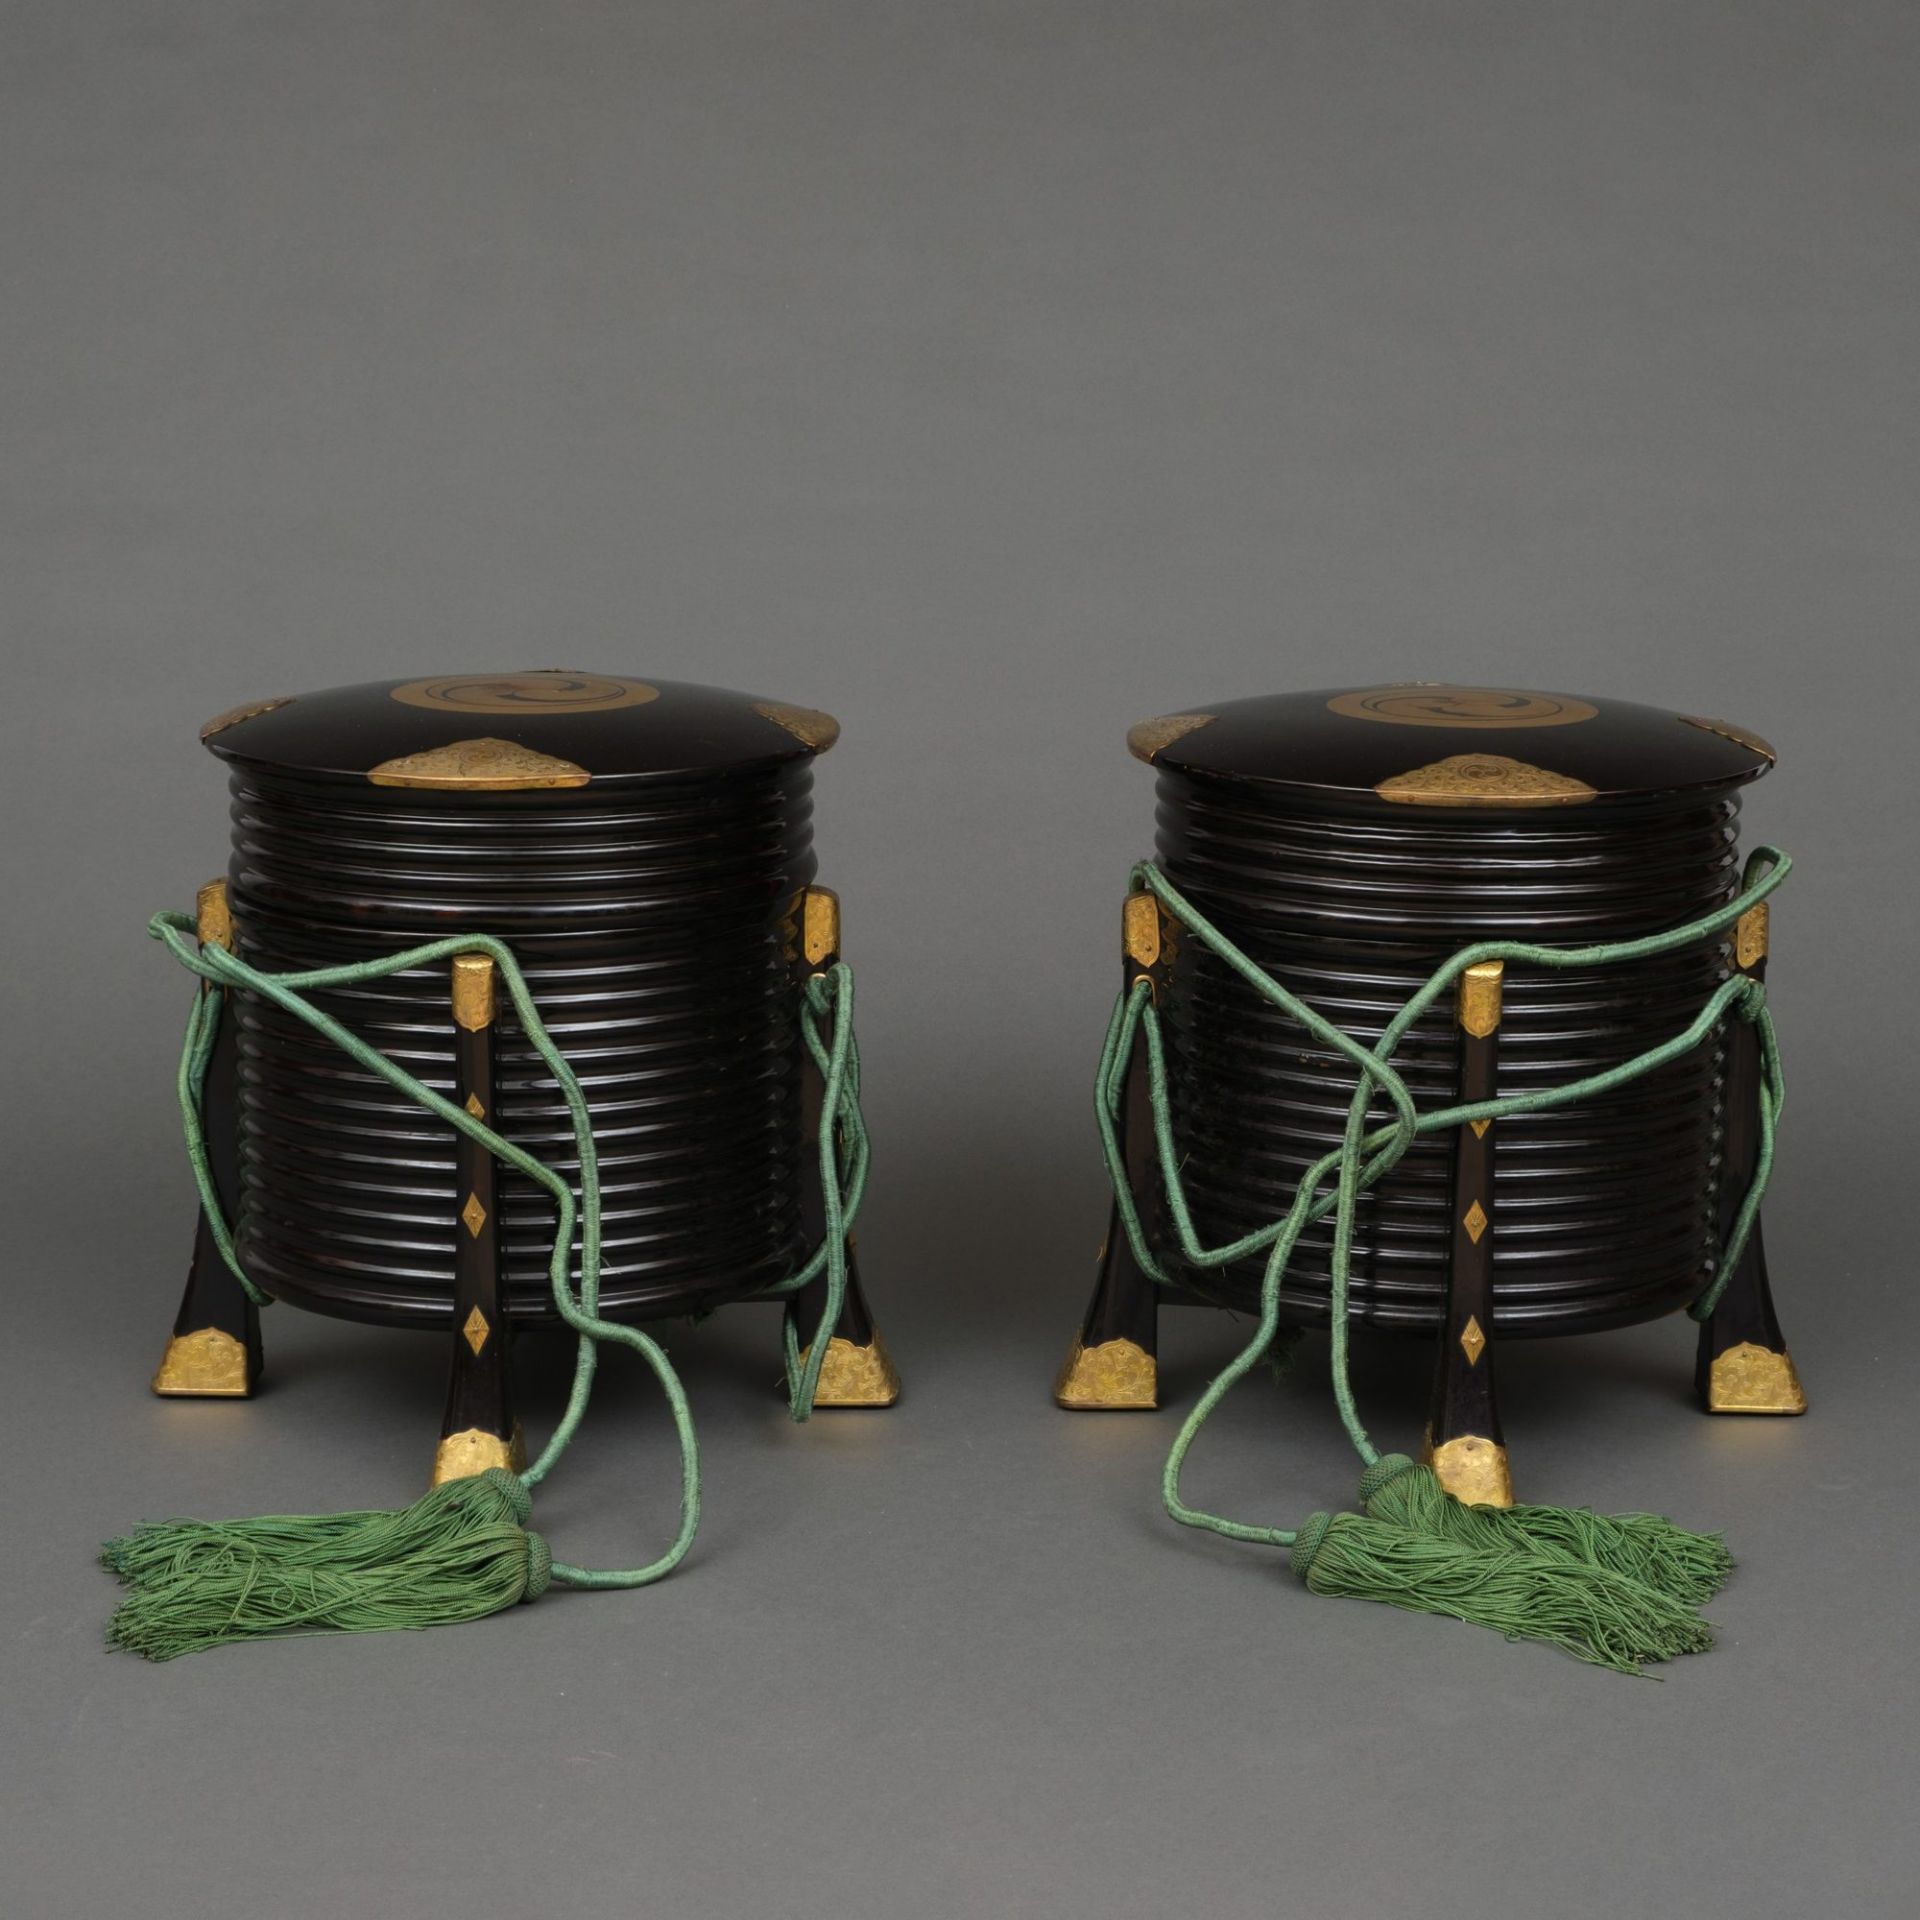 A PAIR OF JAPANESE BLACK LACQUERED WOODEN STORAGE CONTAINERS, FIRST HALF 19TH CENTURY (LATE EDO PERI - Bild 2 aus 5